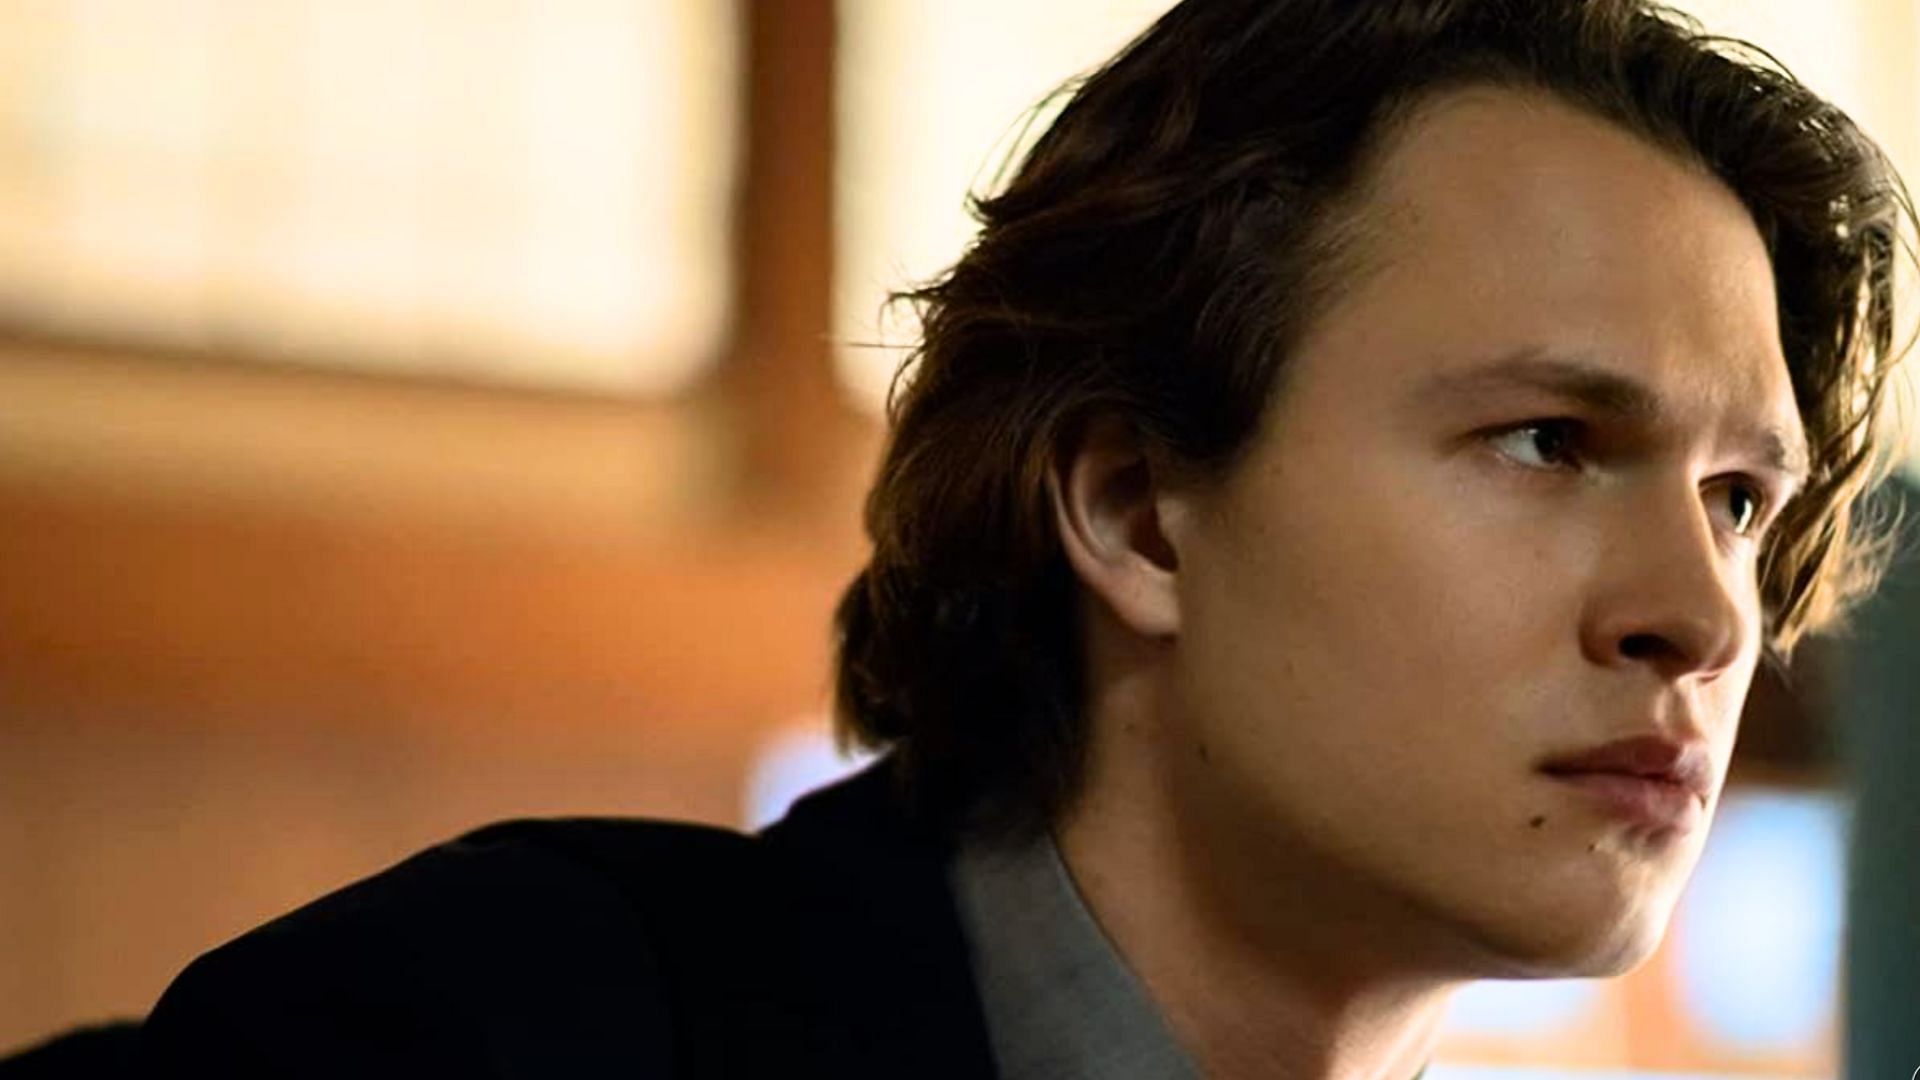 Ansel Elgort as Jake in a scene from the show (Image via HBO)